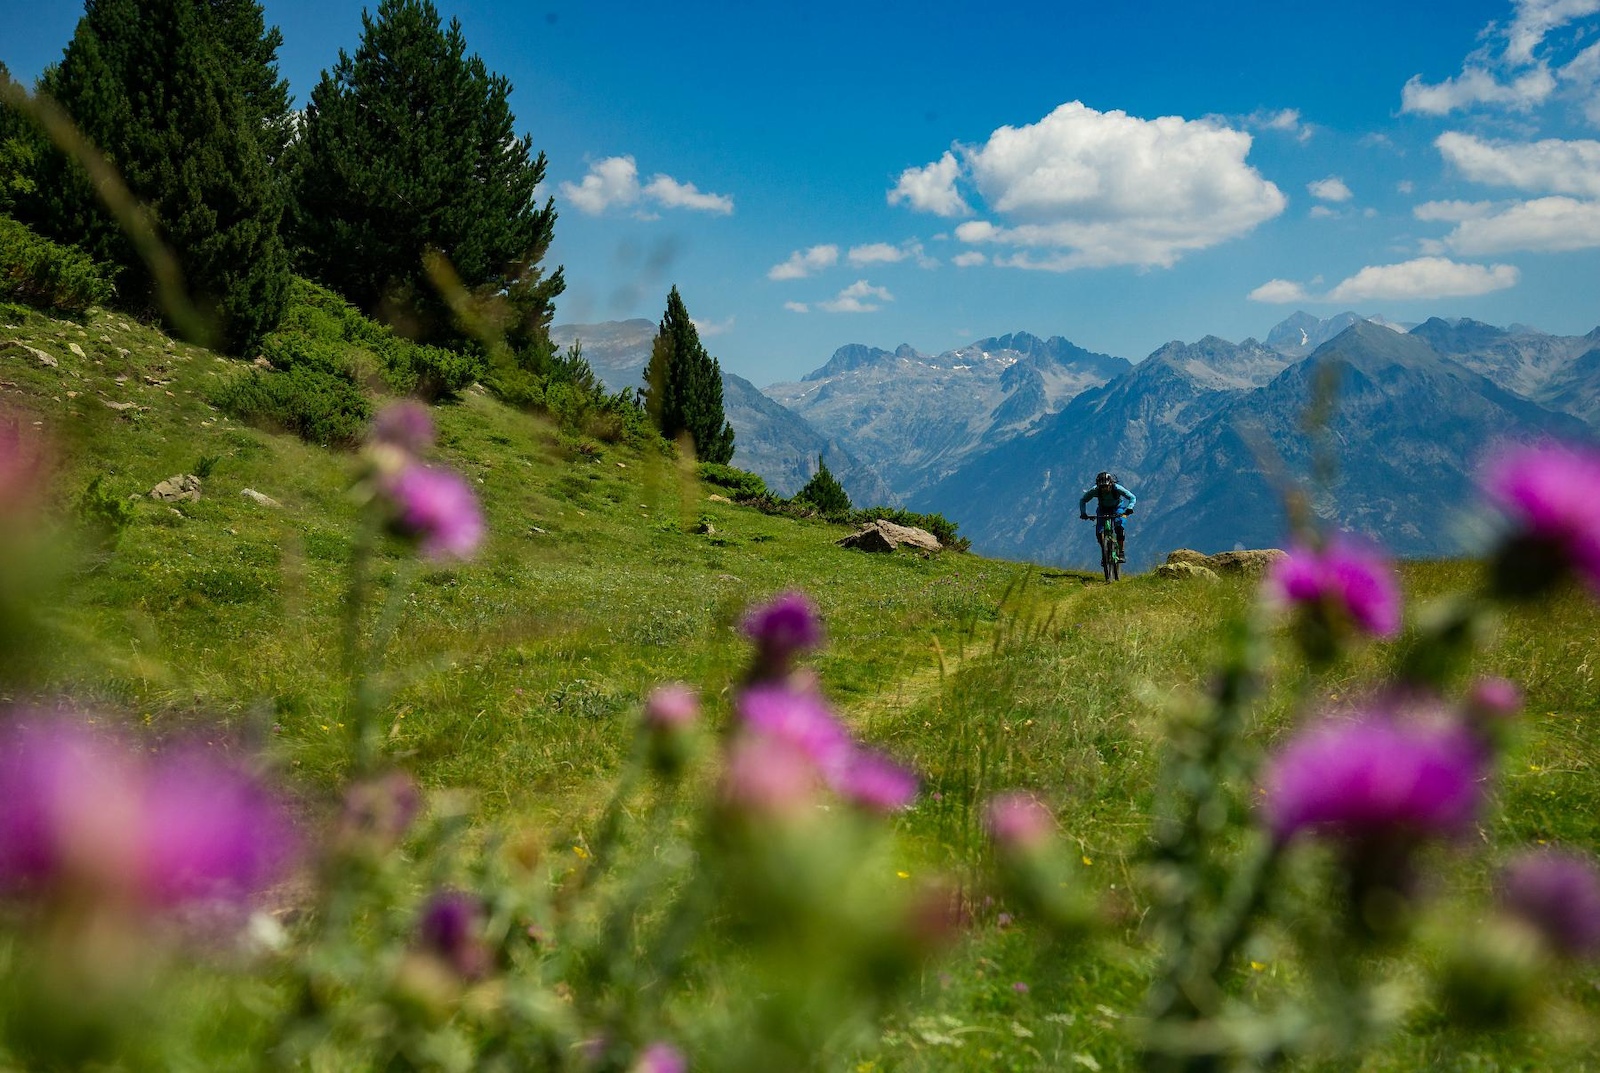 Mr. Basque MTB himself, Doug McDonald small amongst the mighty Pyrenees of the Tena Valley, a stone's throw away from the Spanish/French frontier.

Selected for POD by Sarah Moore on February 5th 2019.